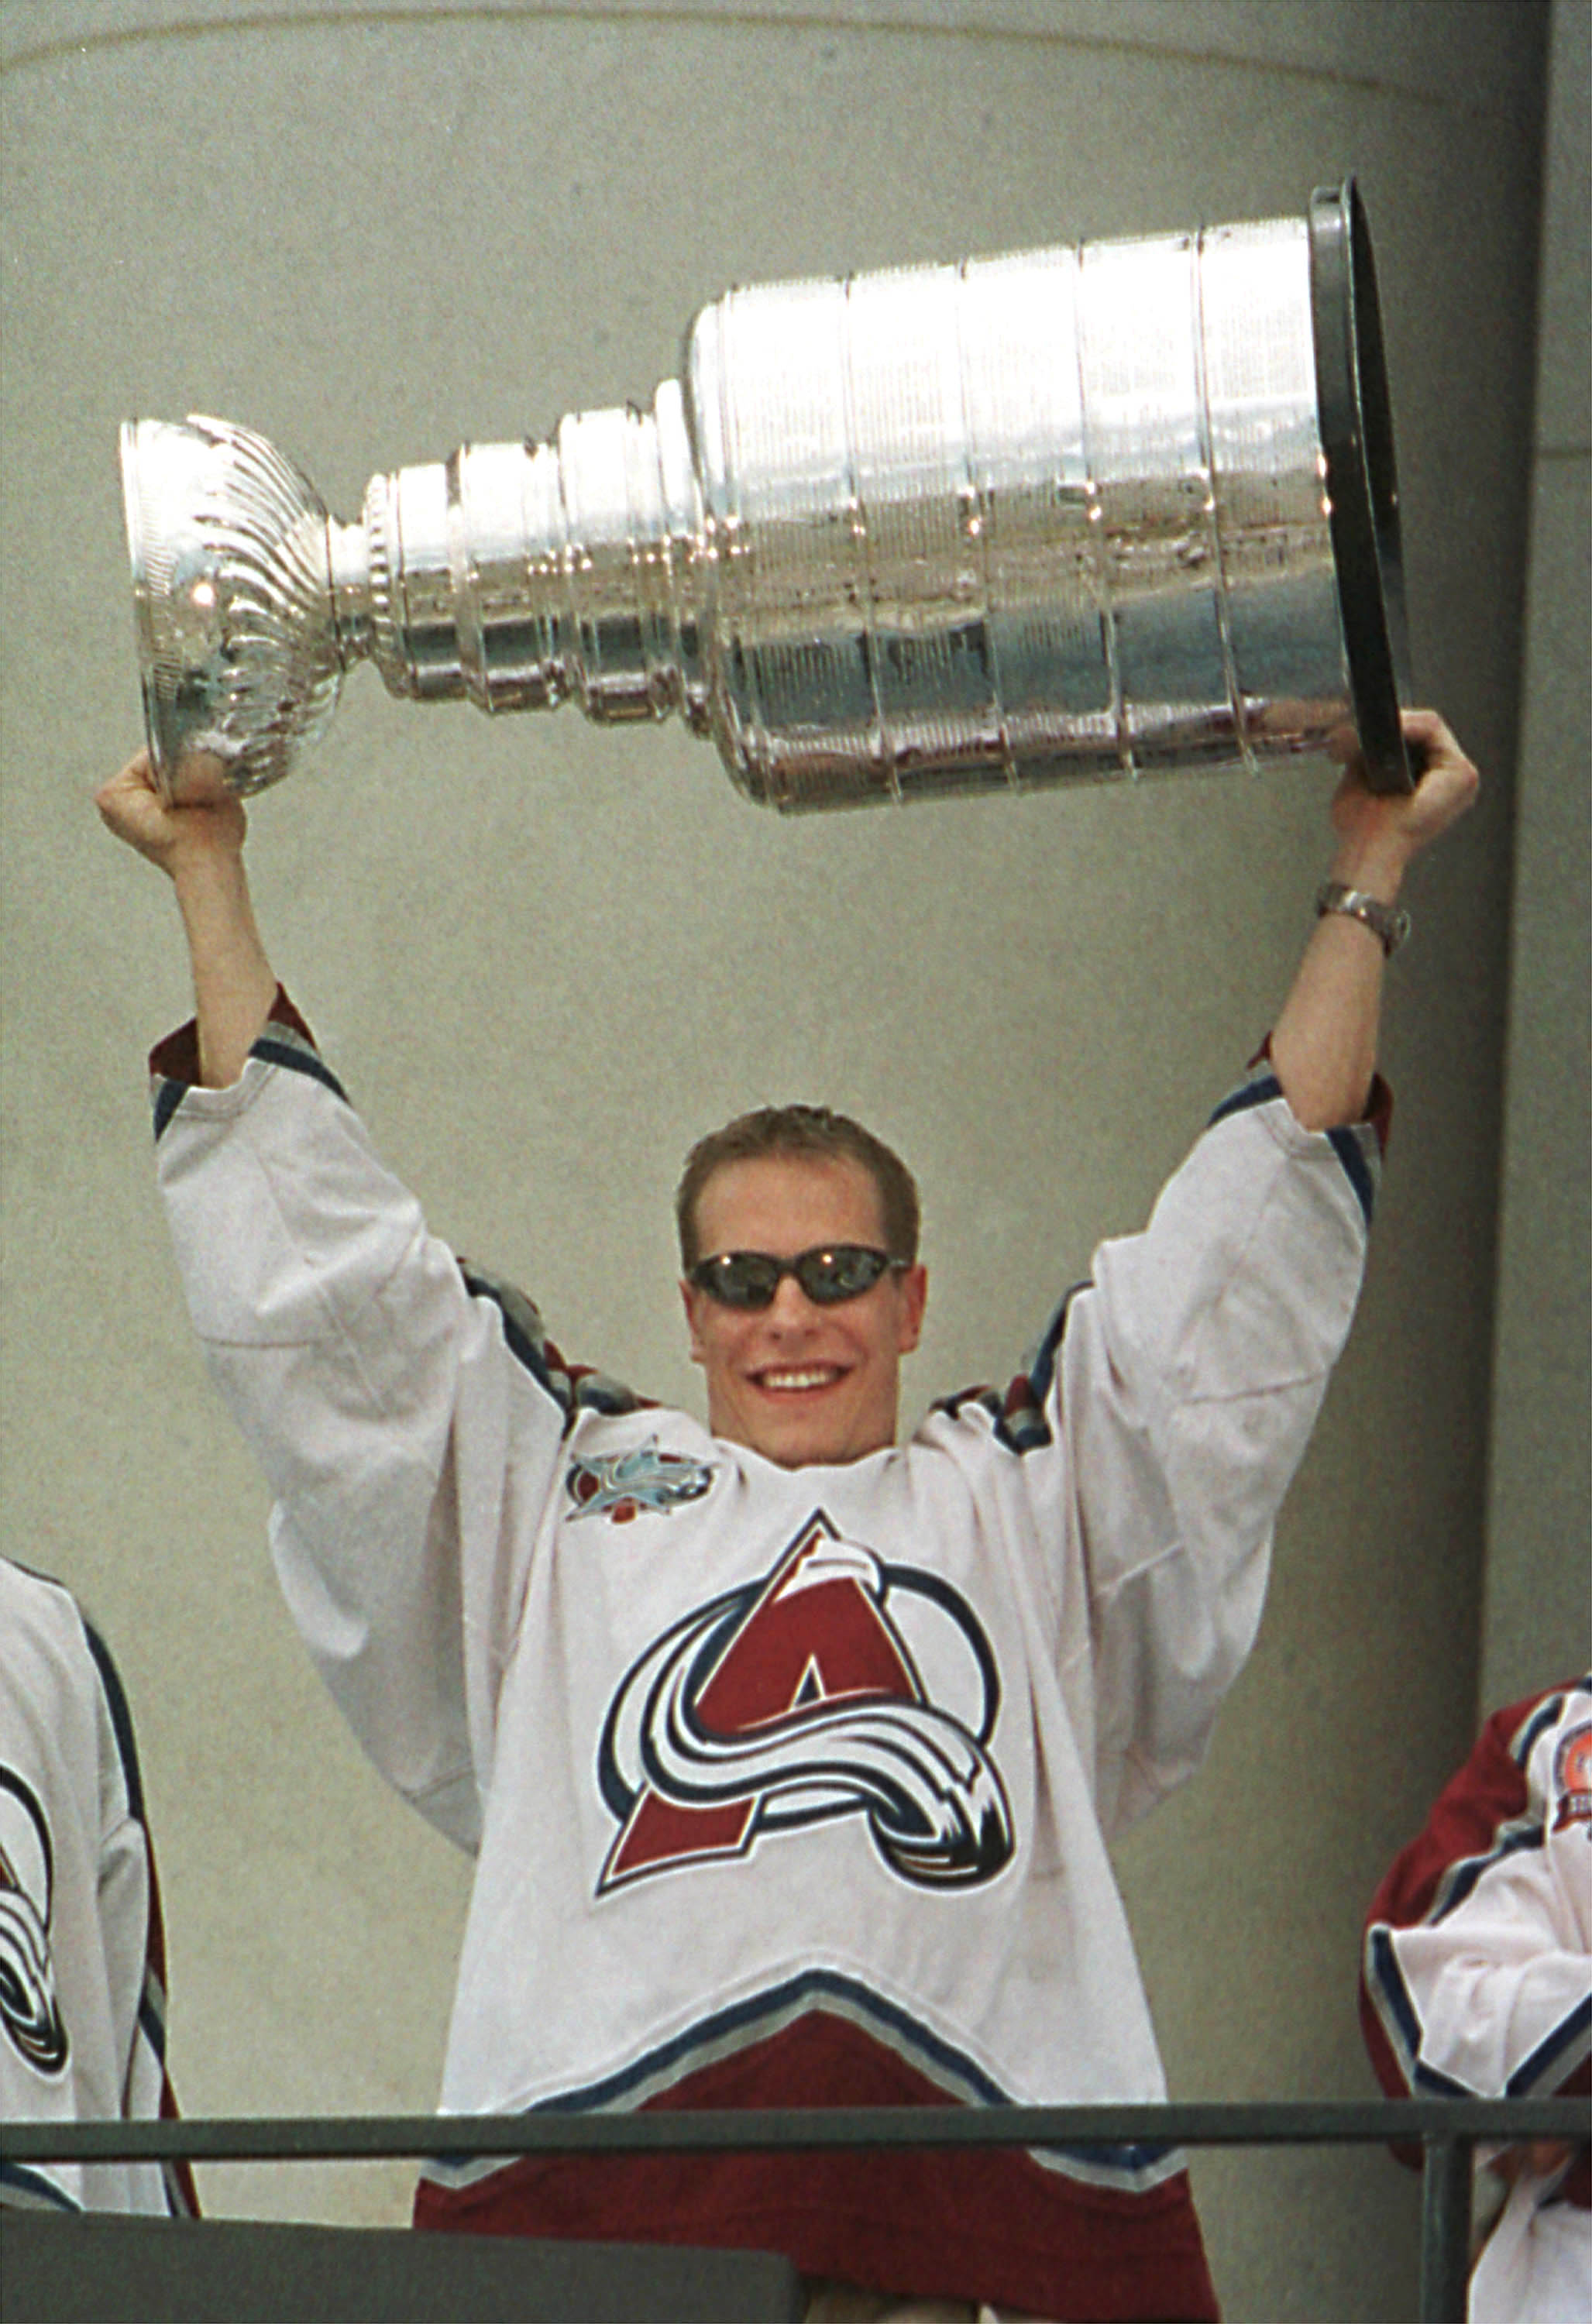 390458 02: Colorado Avalanche winger Ville Nieminen of Finland shows the Stanley Cup to fans during a victory rally at the City and County Building June 11, 2001 in downtown Denver, Colorado. (Photo by Michael Smith/Getty Images)